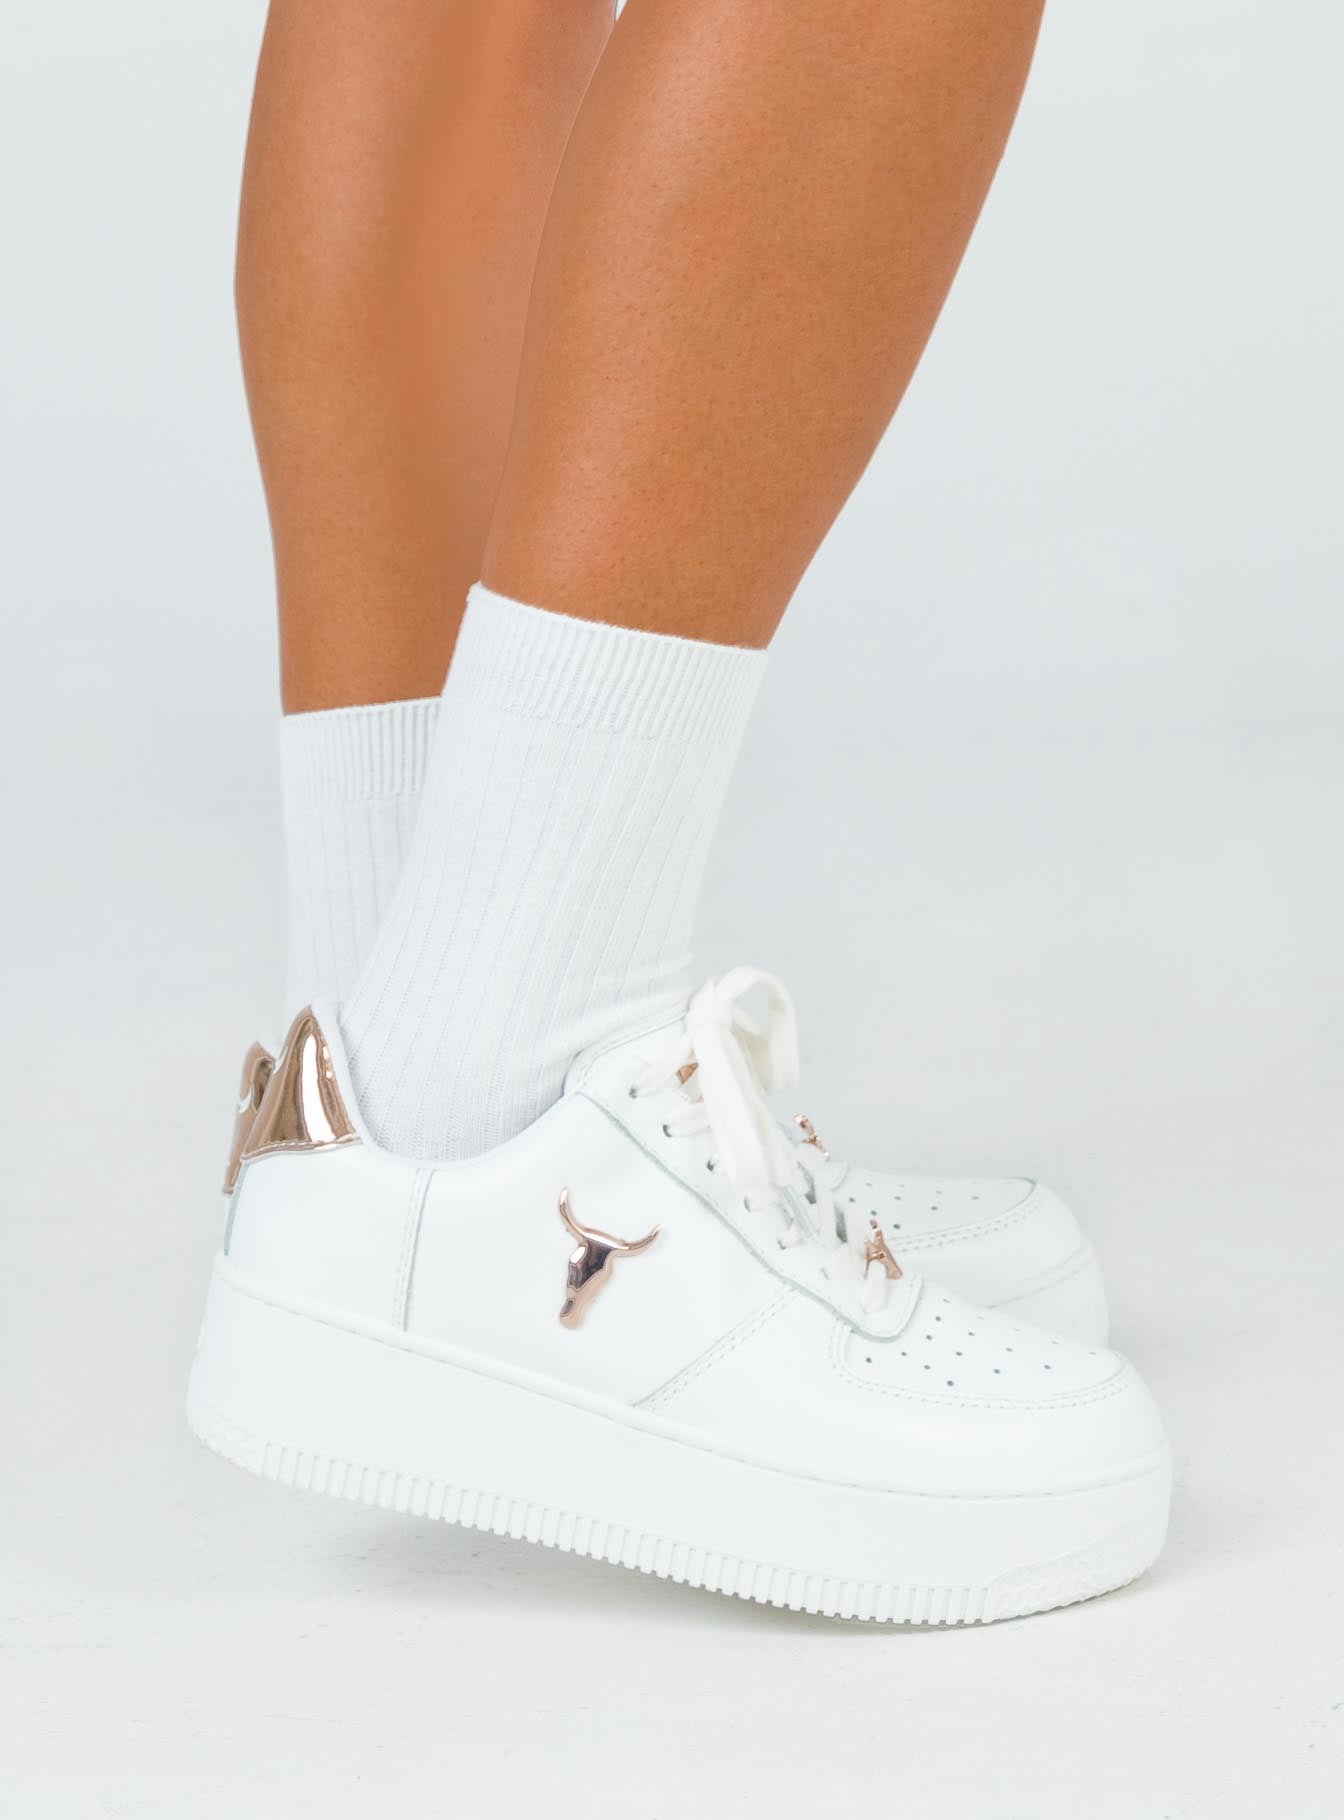 white windsor smith sneakers